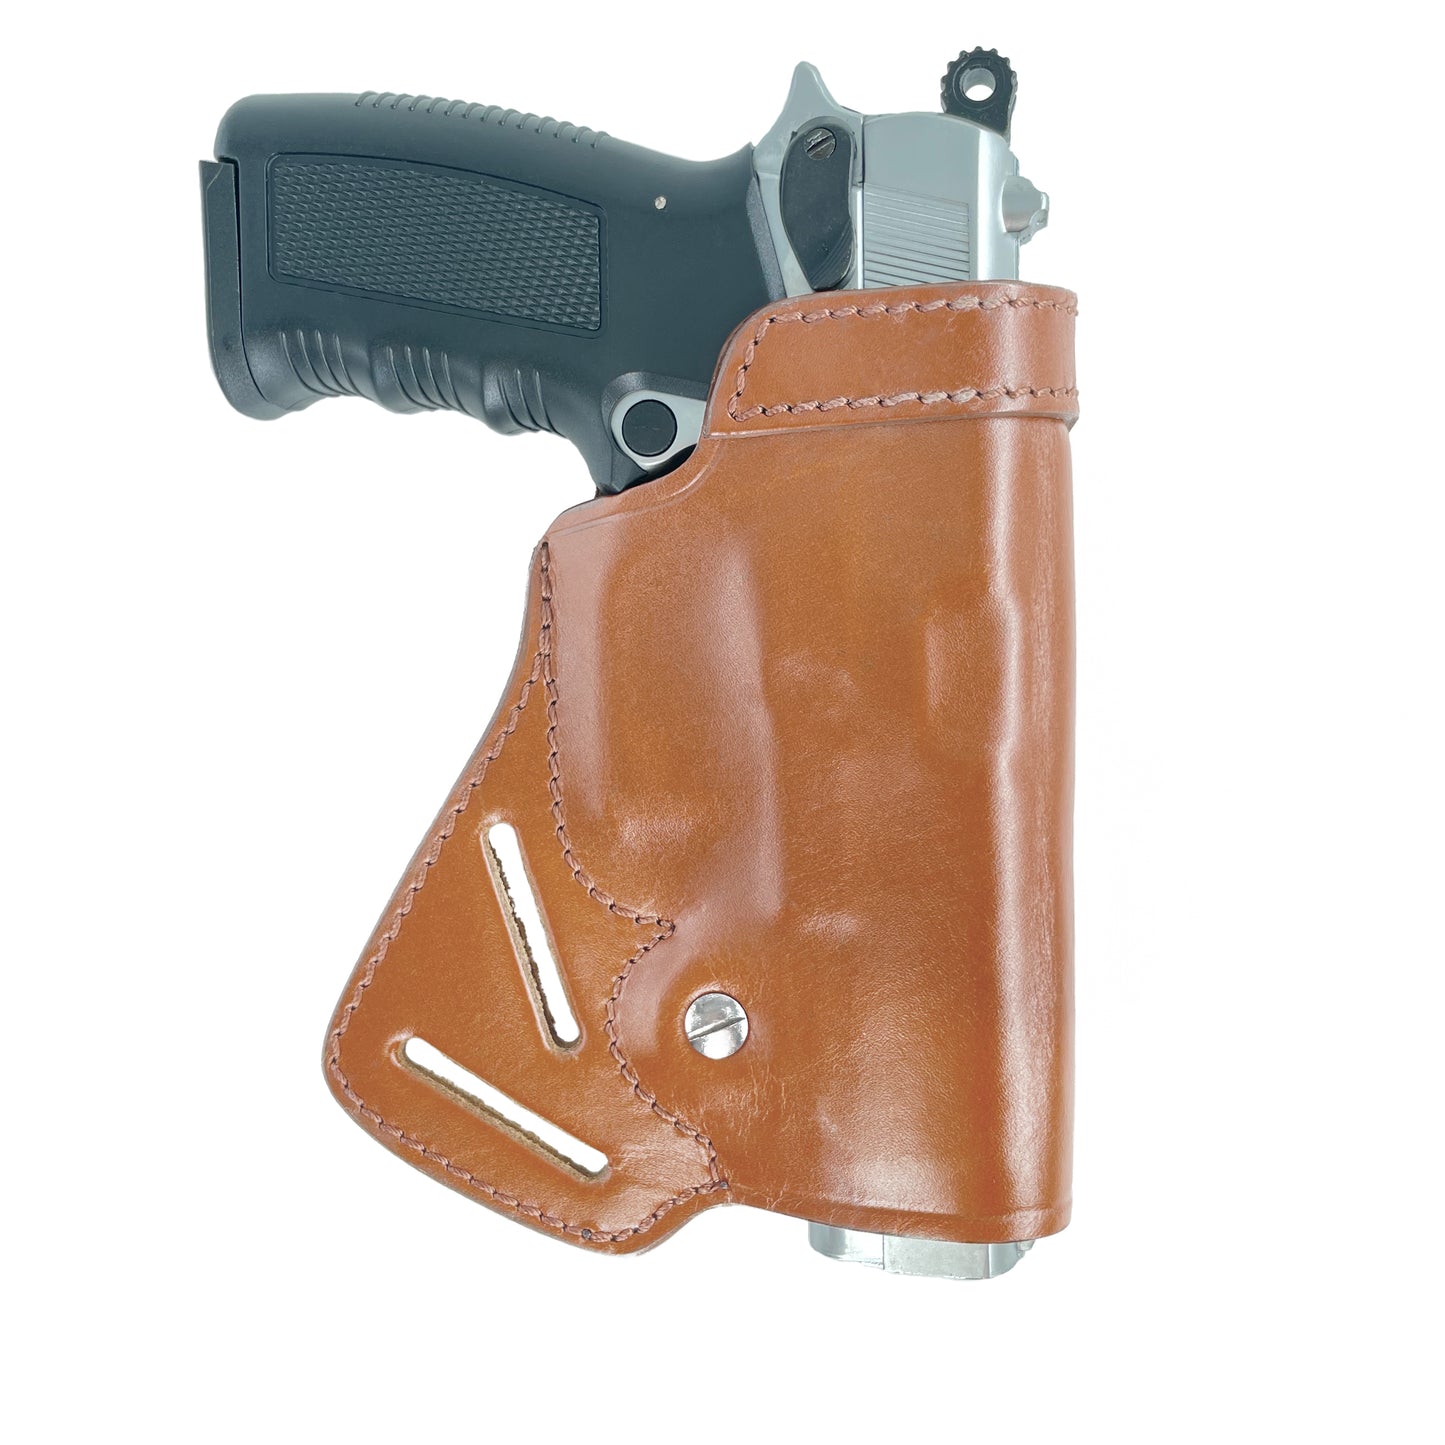 Small of Back Leather Concealment Holster for Glock 19 23 29 32 Genuine Leather Handmade (ALIS470)